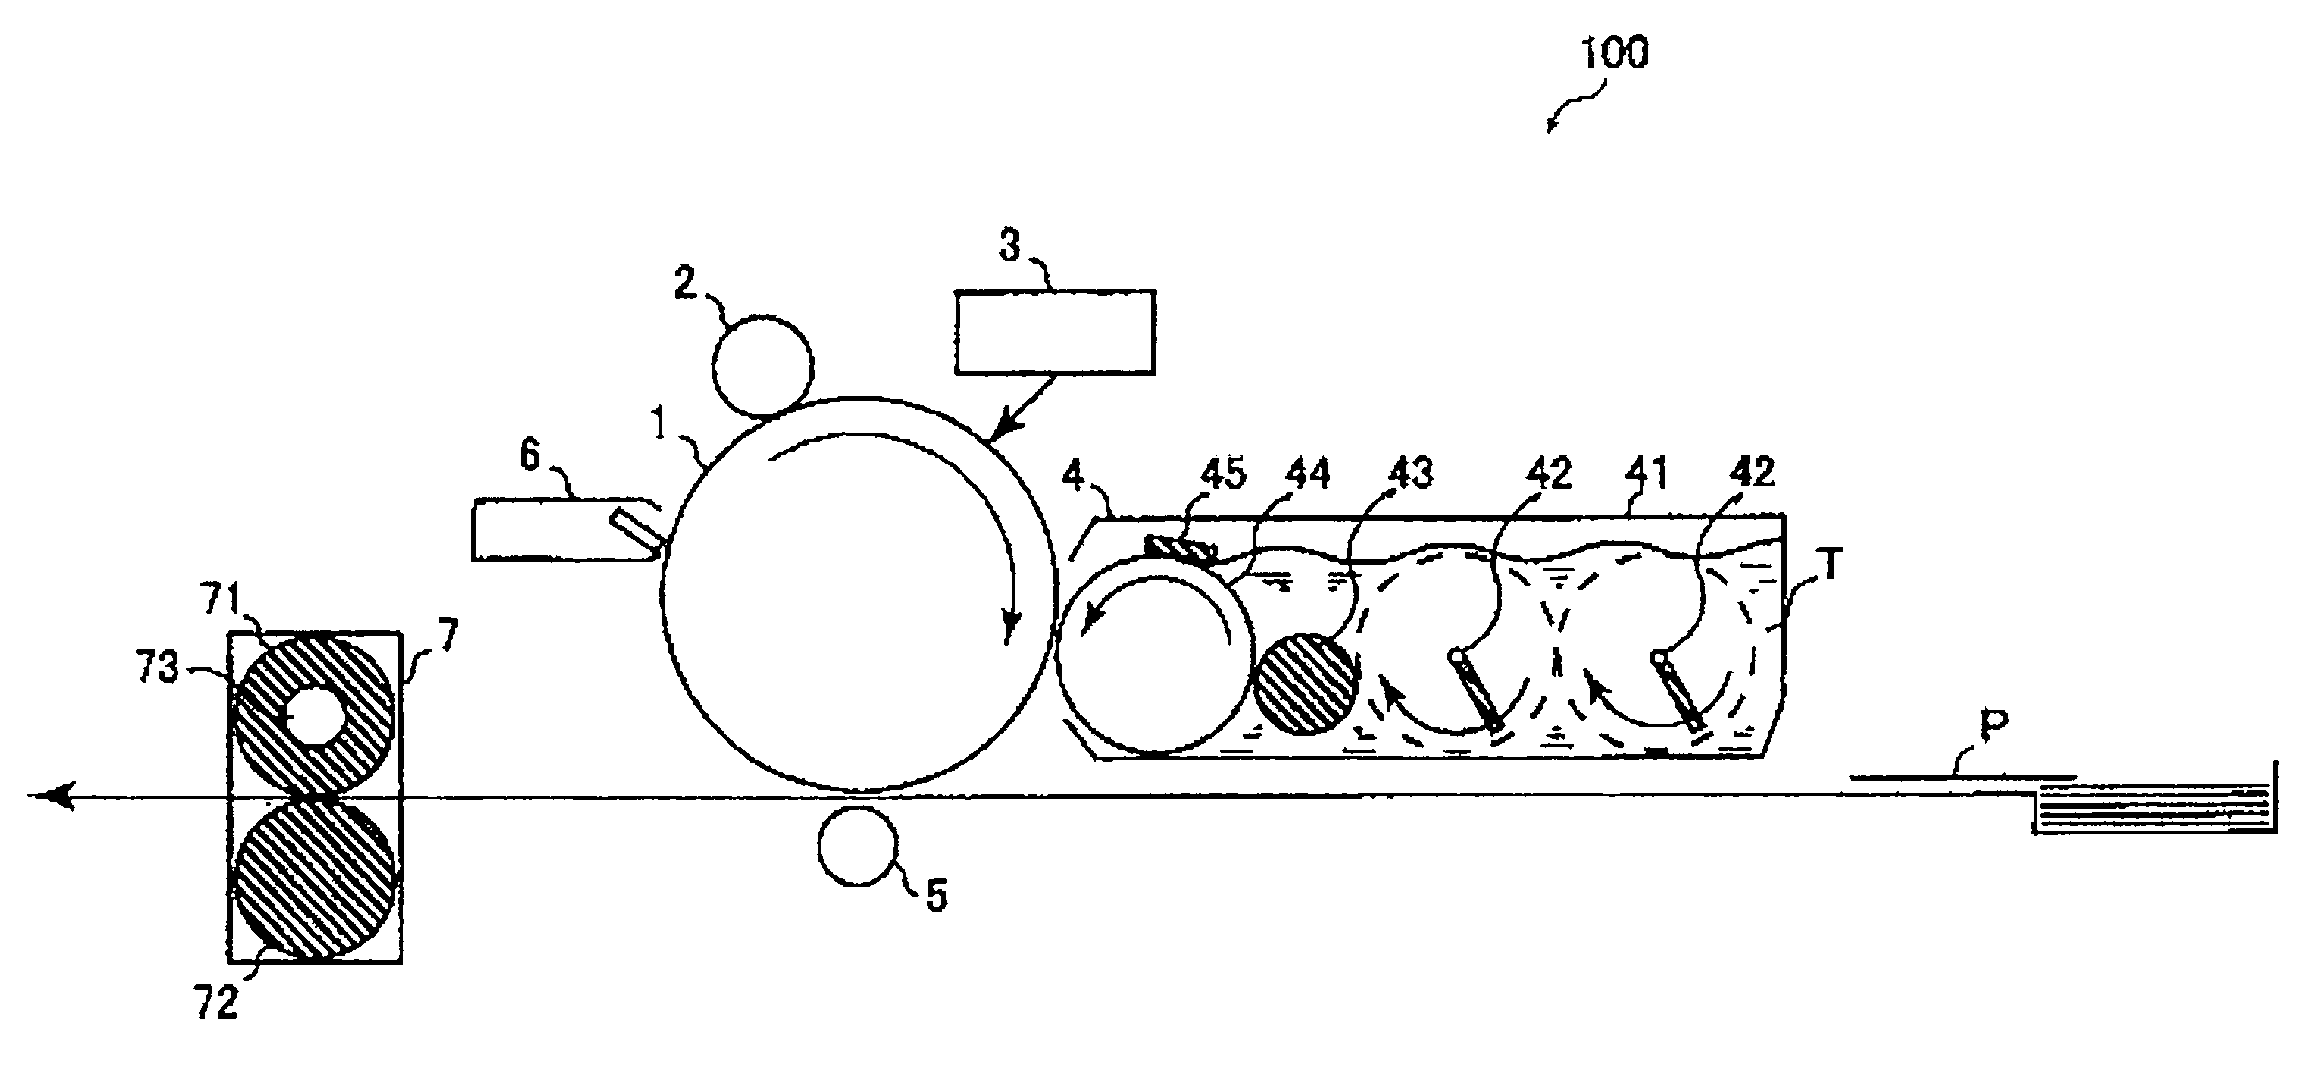 Image forming apparatus and electrophotographic cartridge